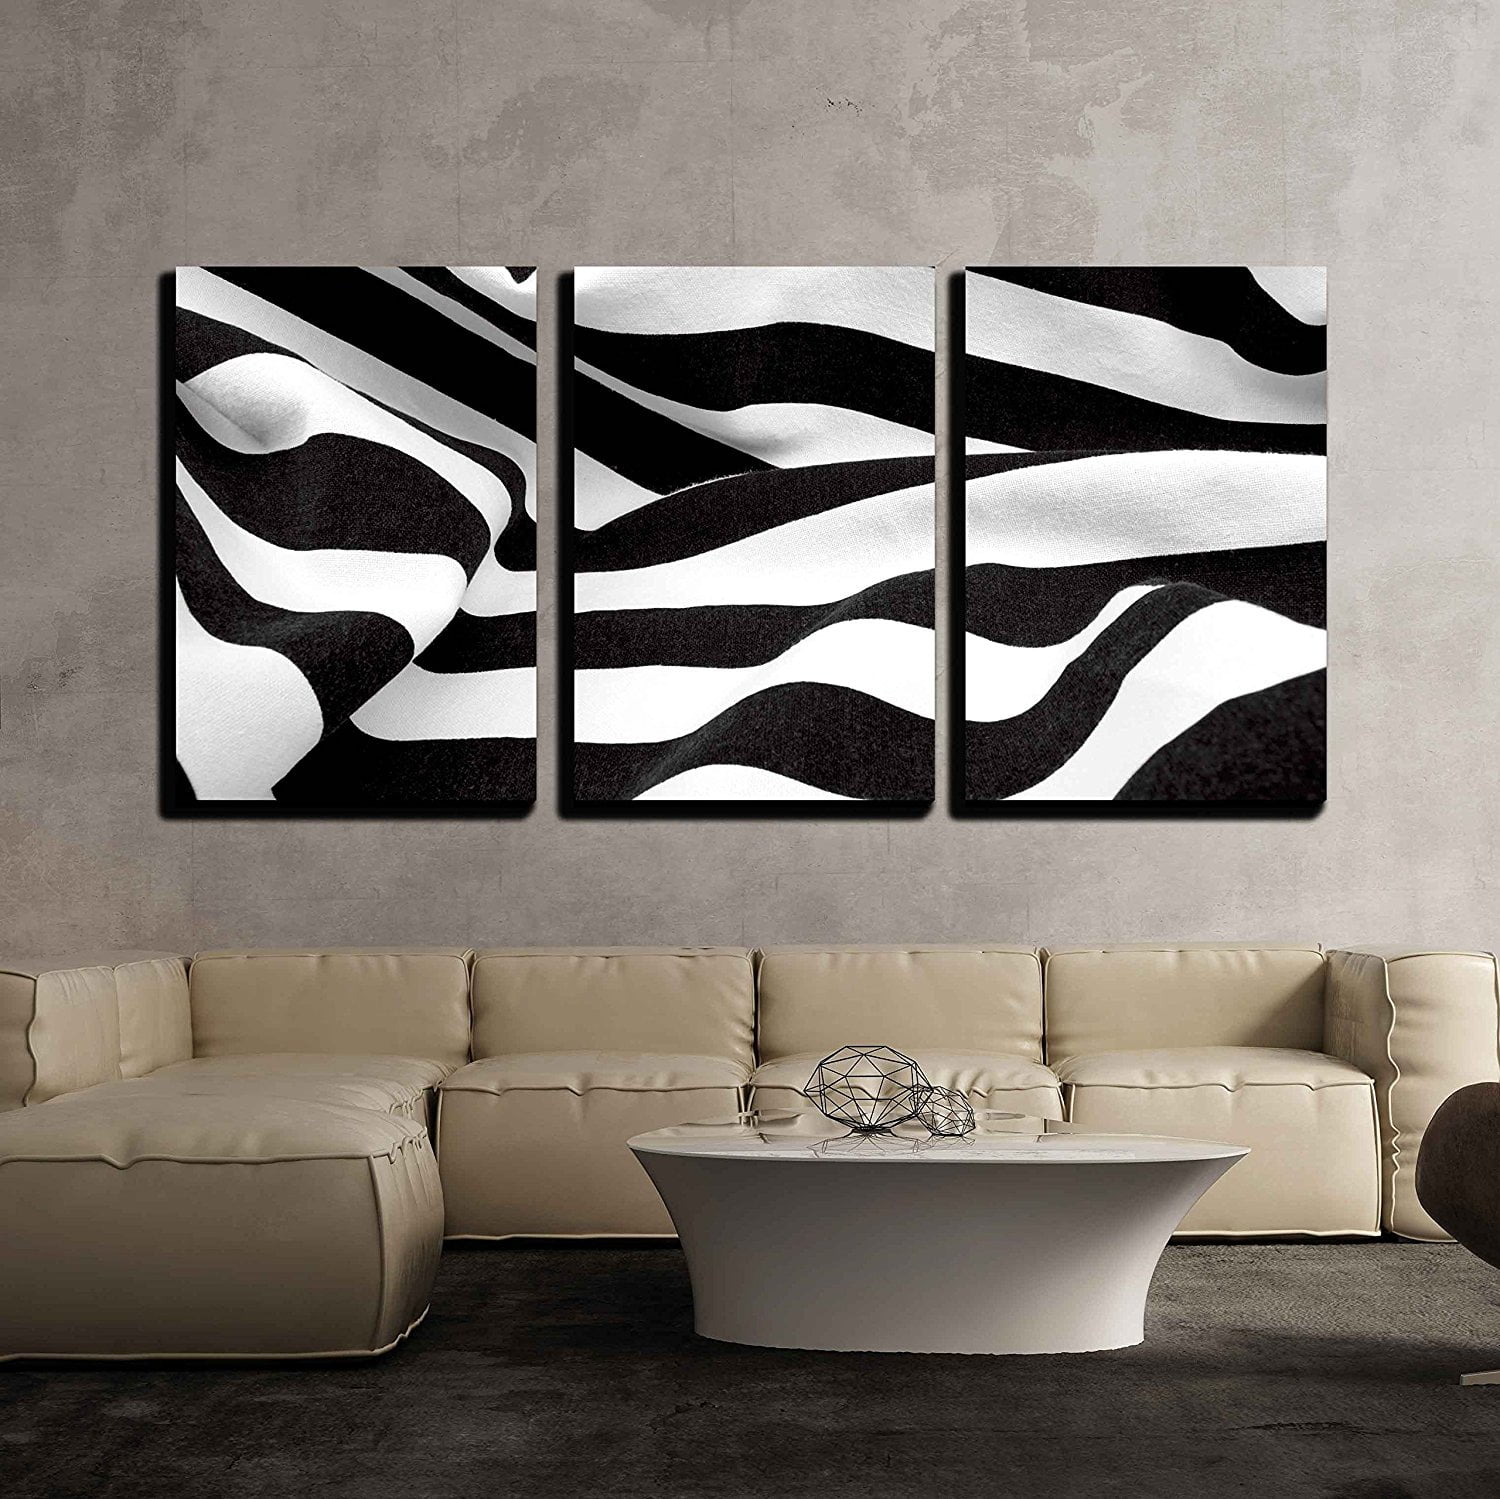 Wall26 3 Piece Canvas Wall Art - Black and White Fabric Creates a Swirl